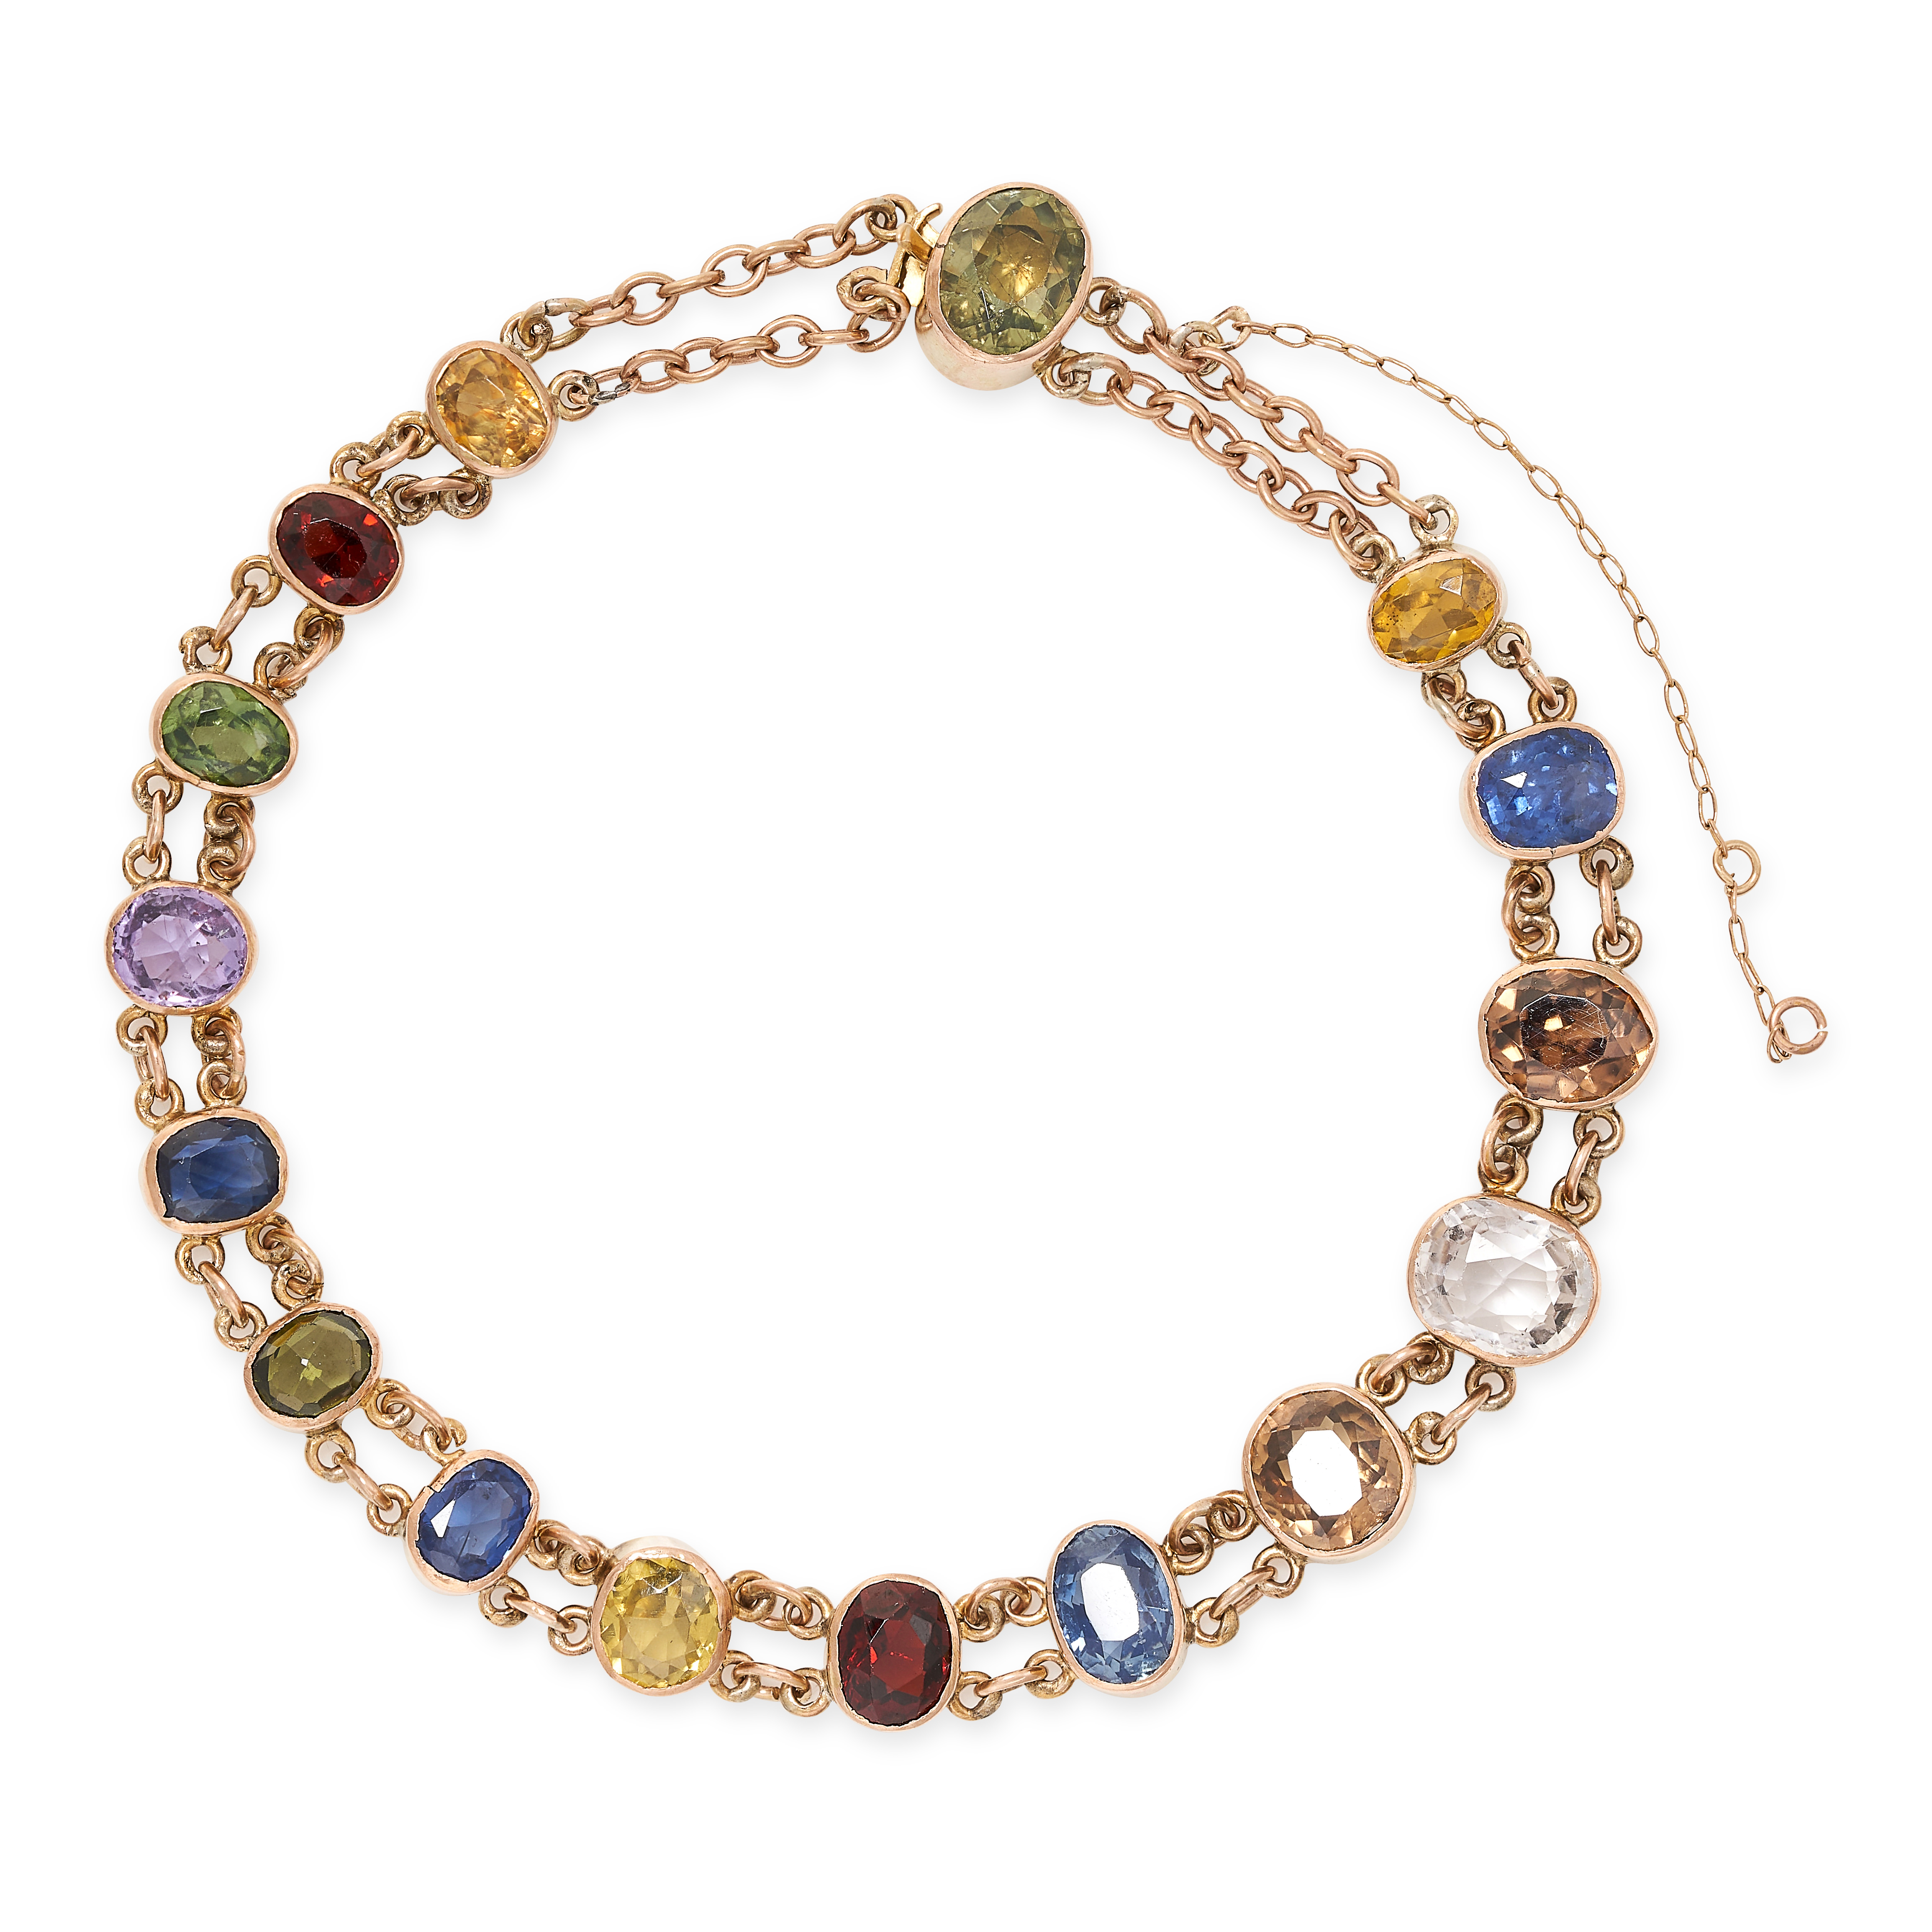 AN ANTIQUE SAPPHIRE AND ZIRCON BRACELET in yellow gold, set with a row of sixteen graduated